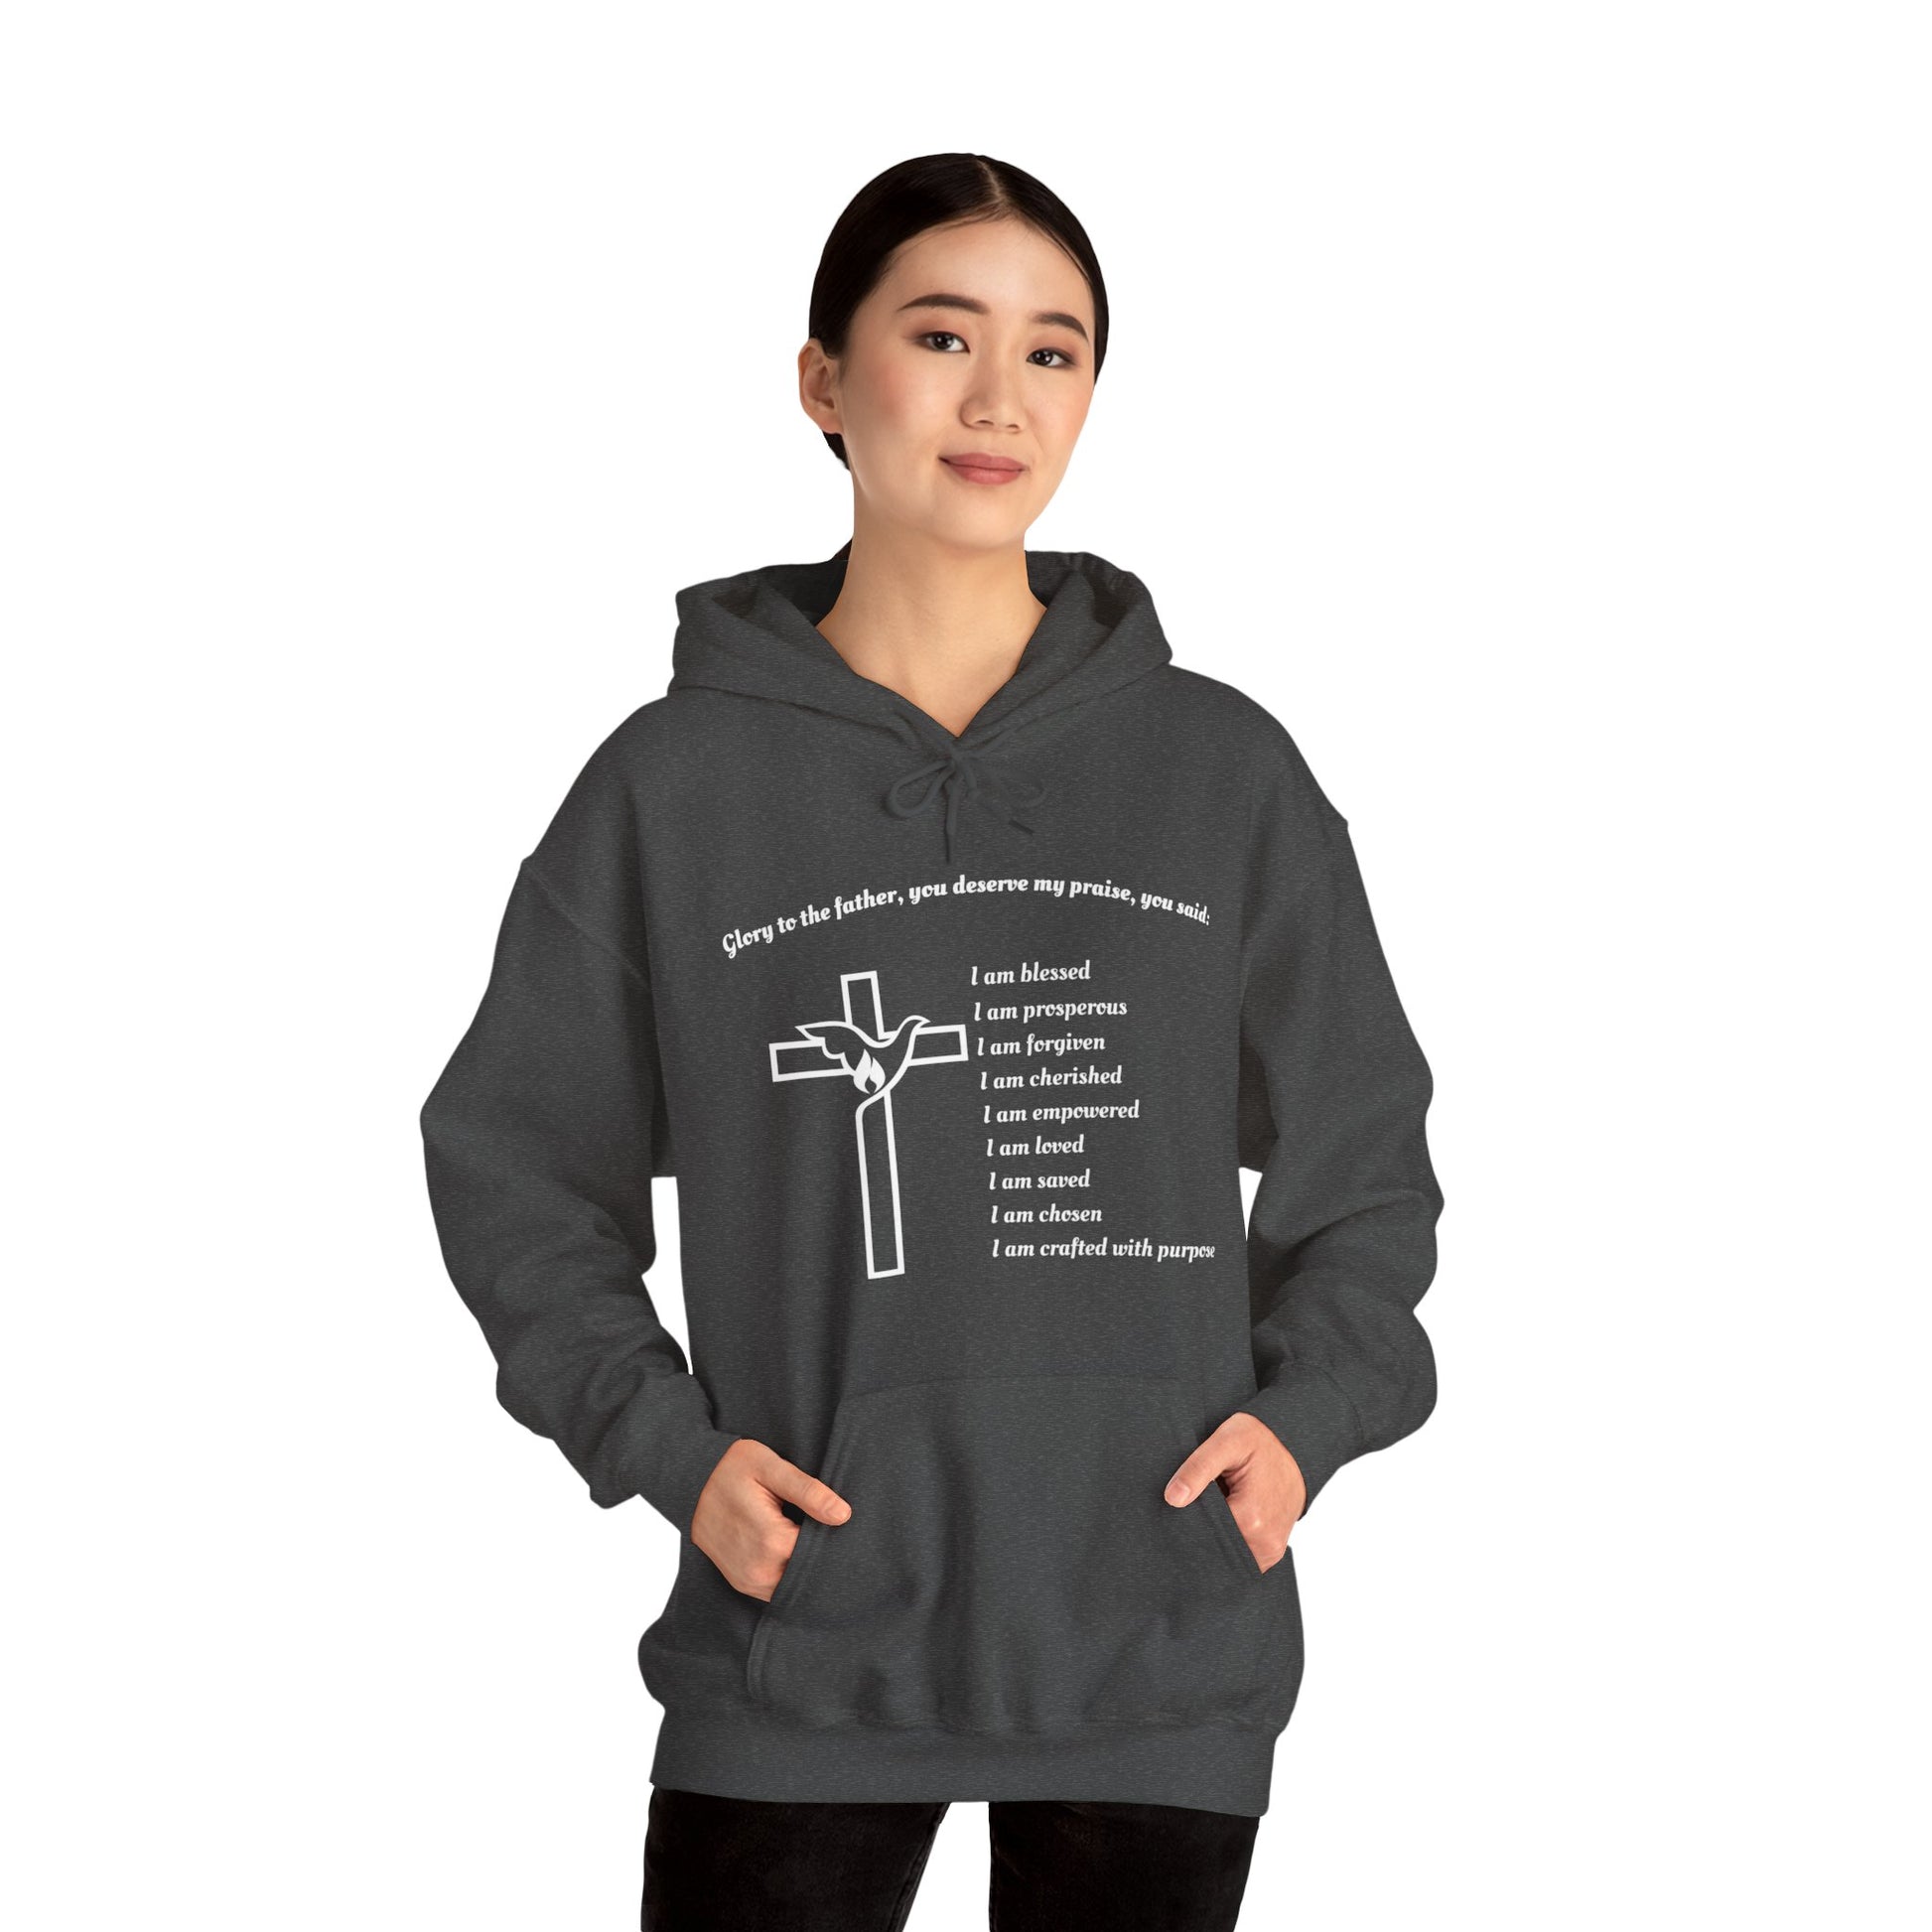 I am Glory to the Father Hooded Sweatshirt Unisex Cozy Heavy Blend7